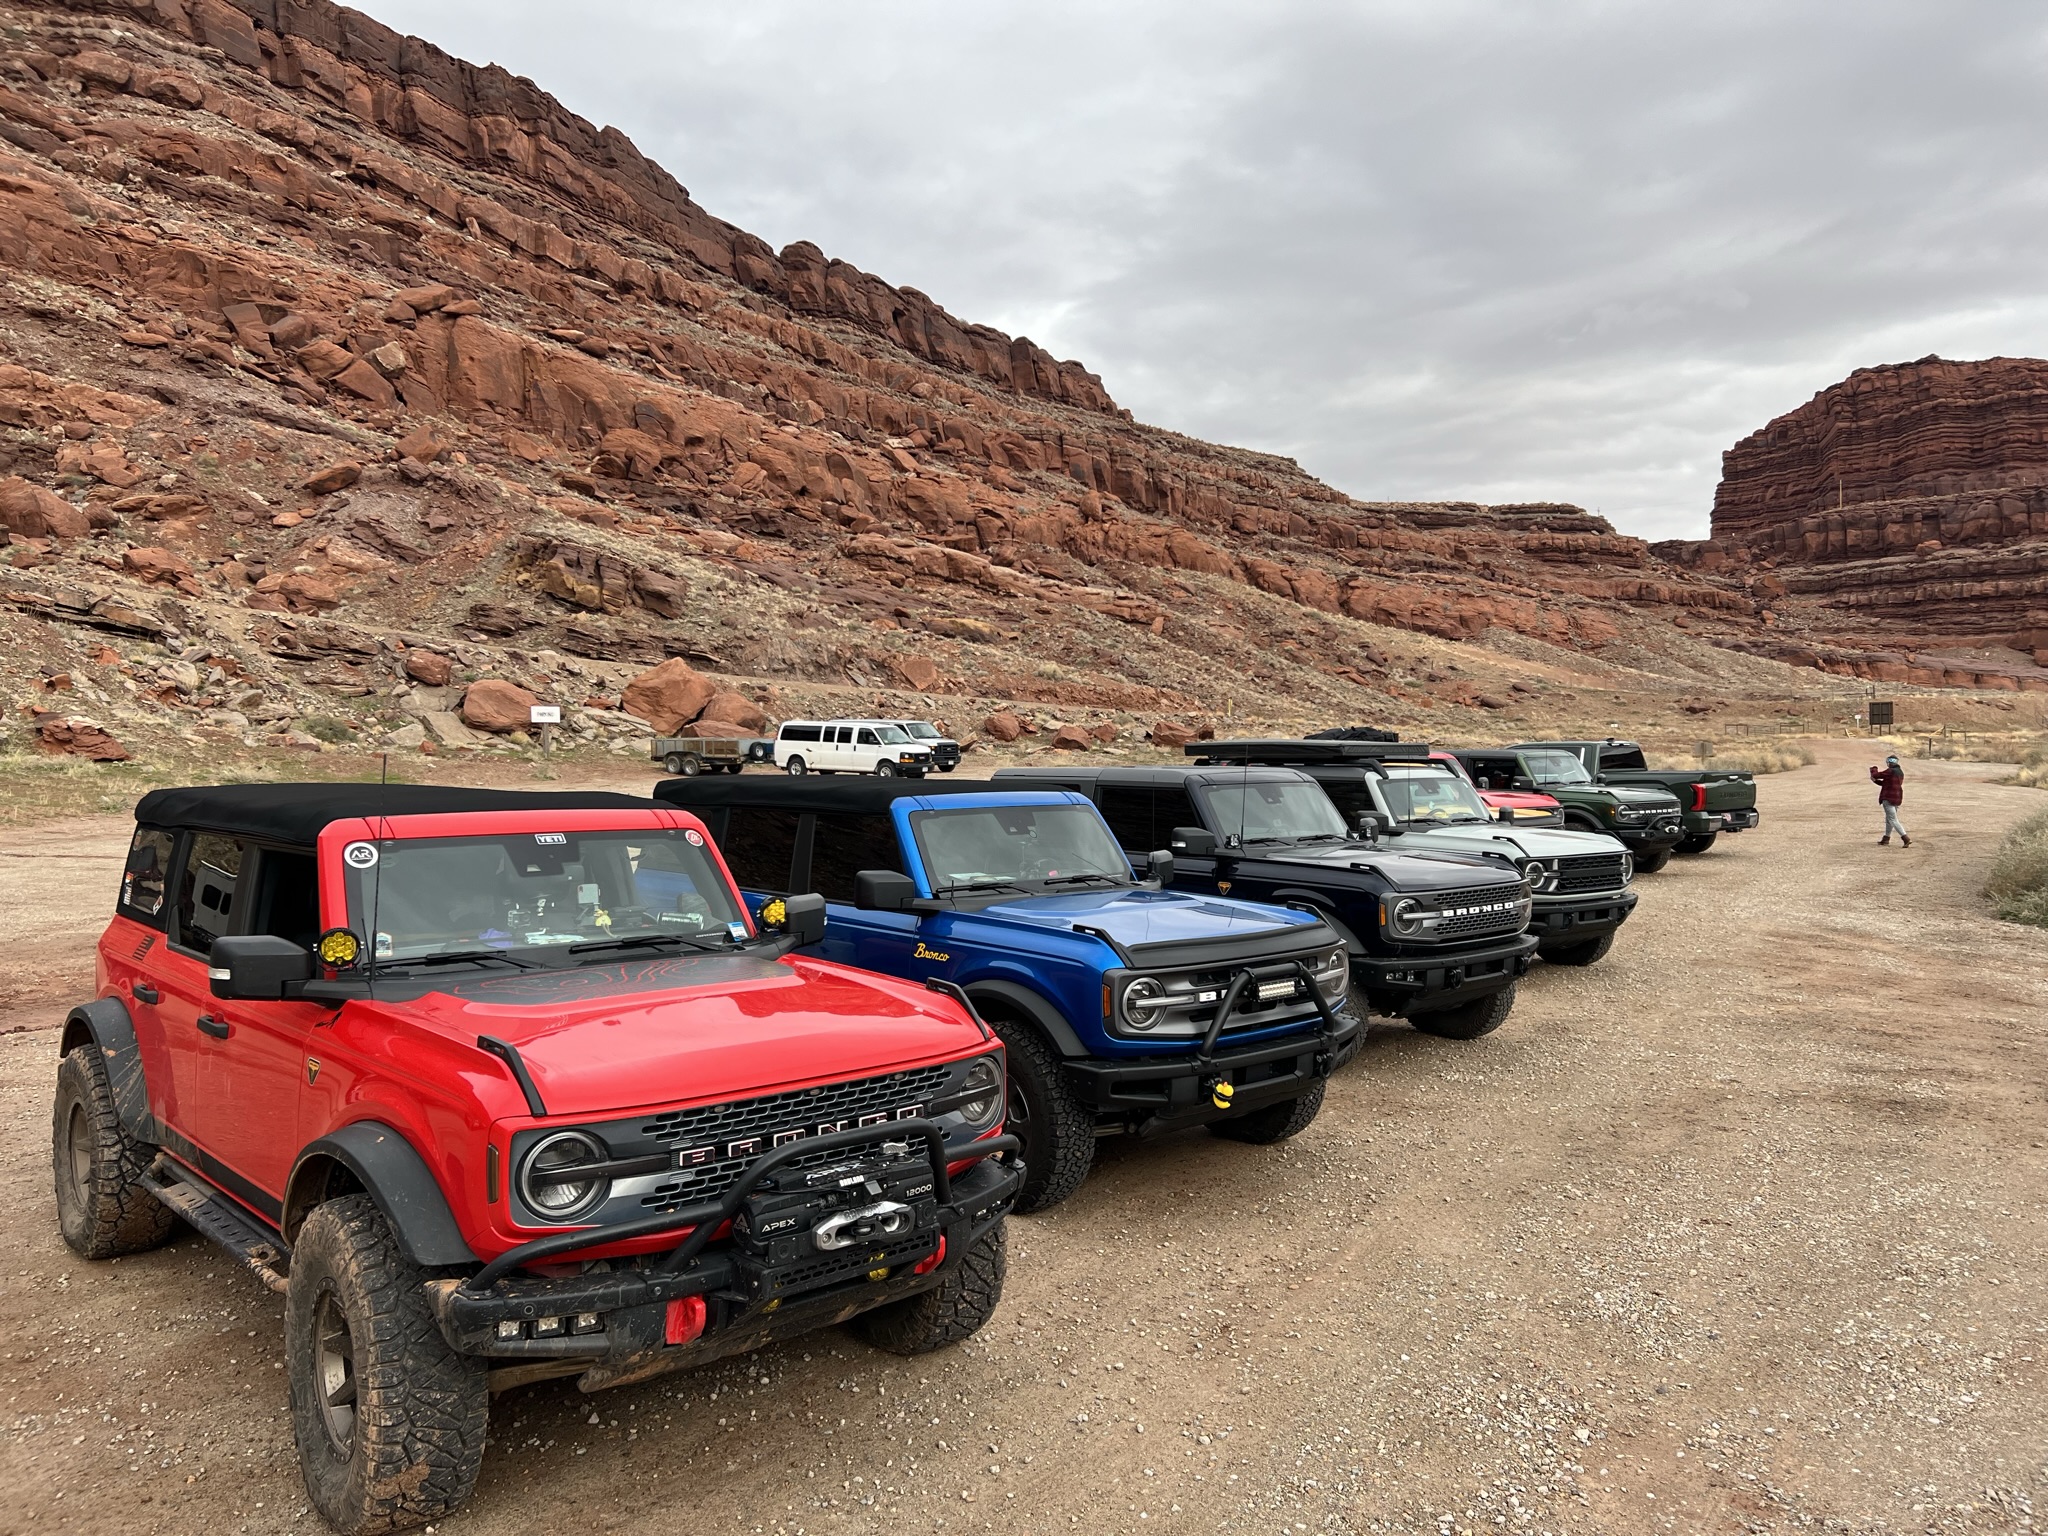 Ford Bronco Broadicustomworks (and B6G friends) venture to Moab IMG_0641.JPEG